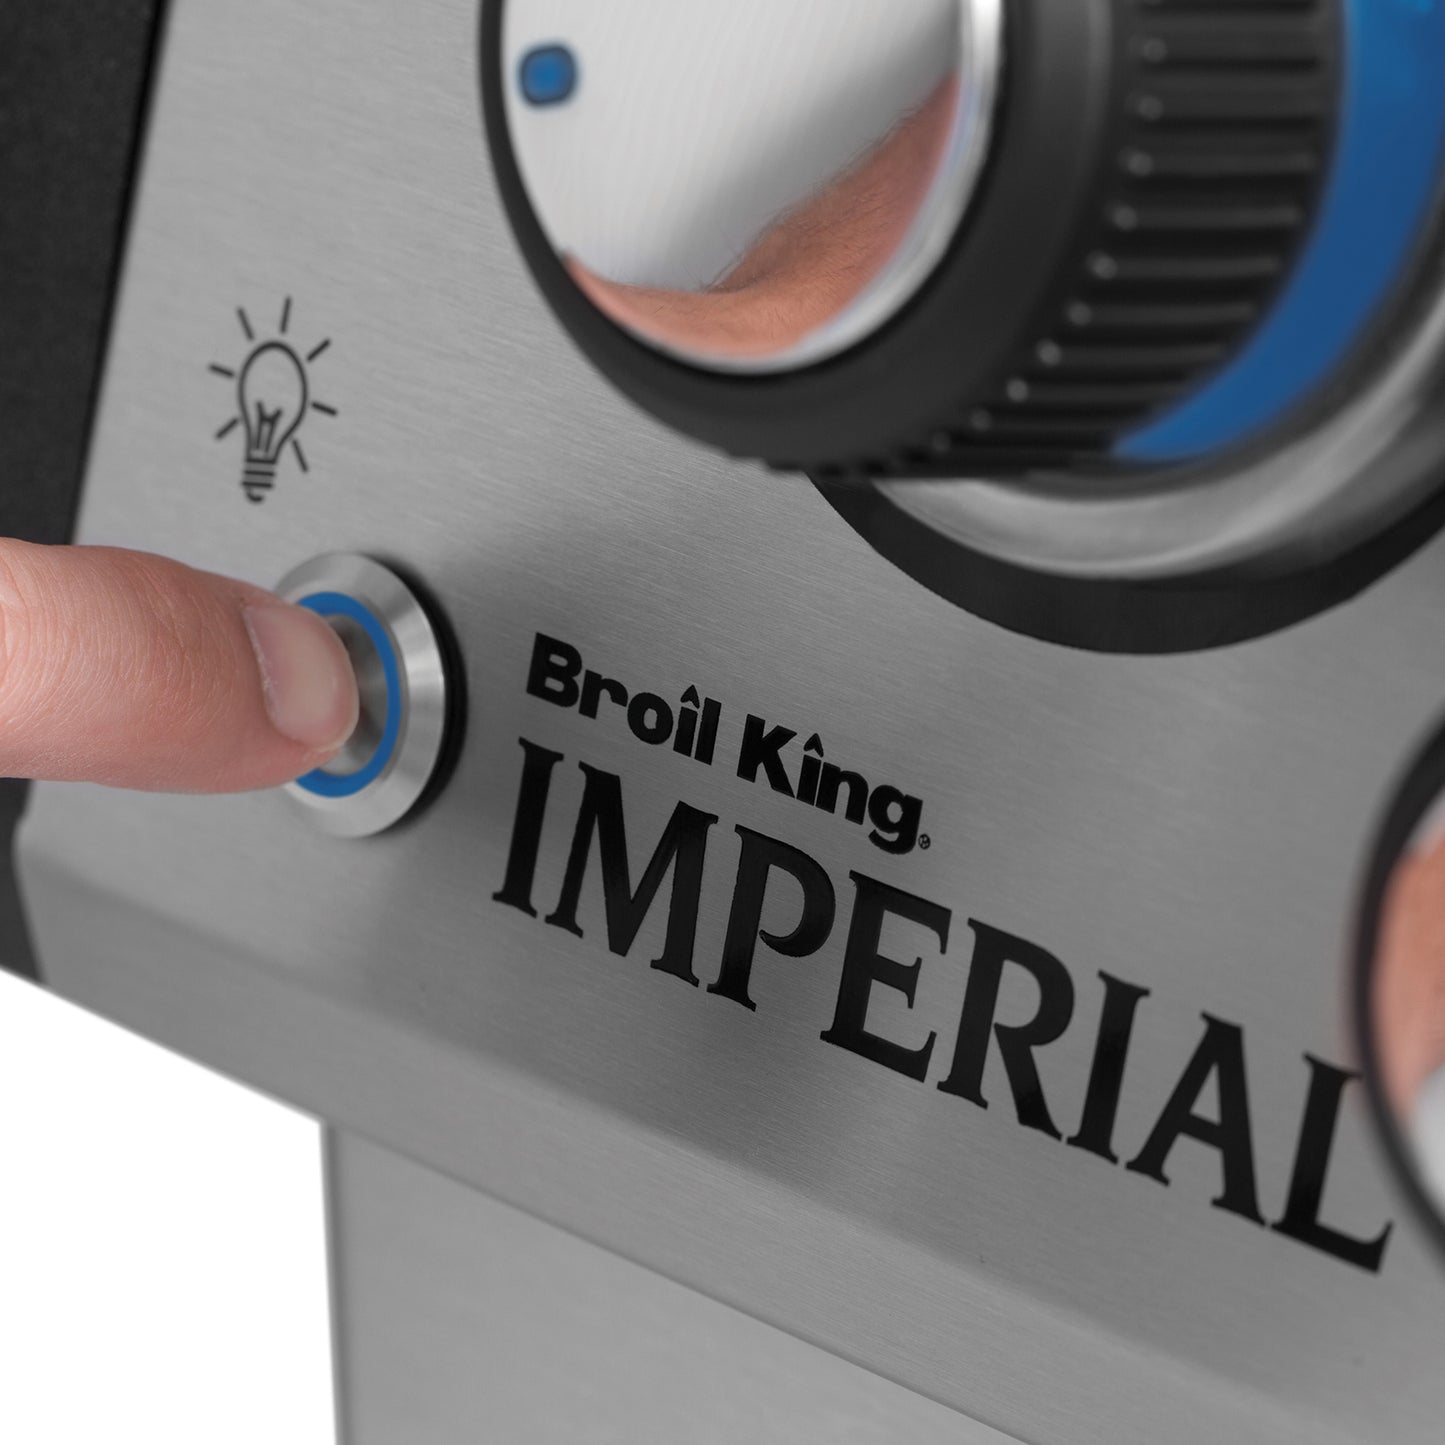 Broil King IMPERIAL™ 590 PRO